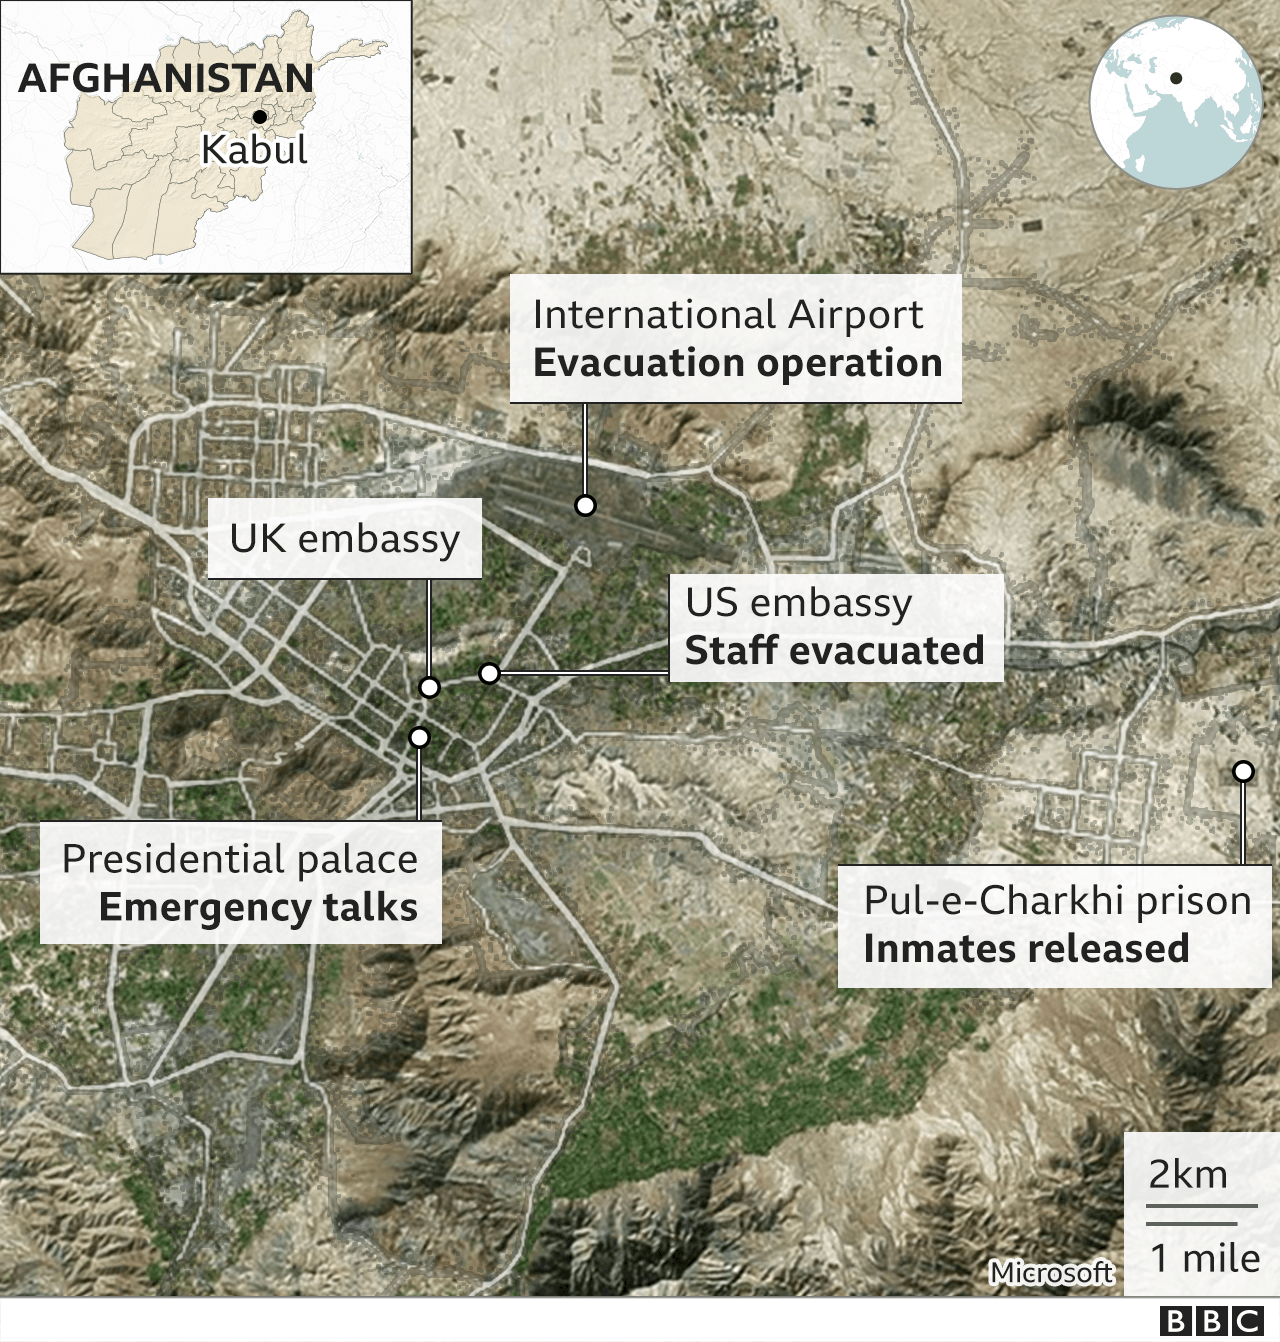 https://ichef.bbci.co.uk/news/976/cpsprodpb/6148/production/_119940942_kabul_locator_map_v2_2x640-nc.png